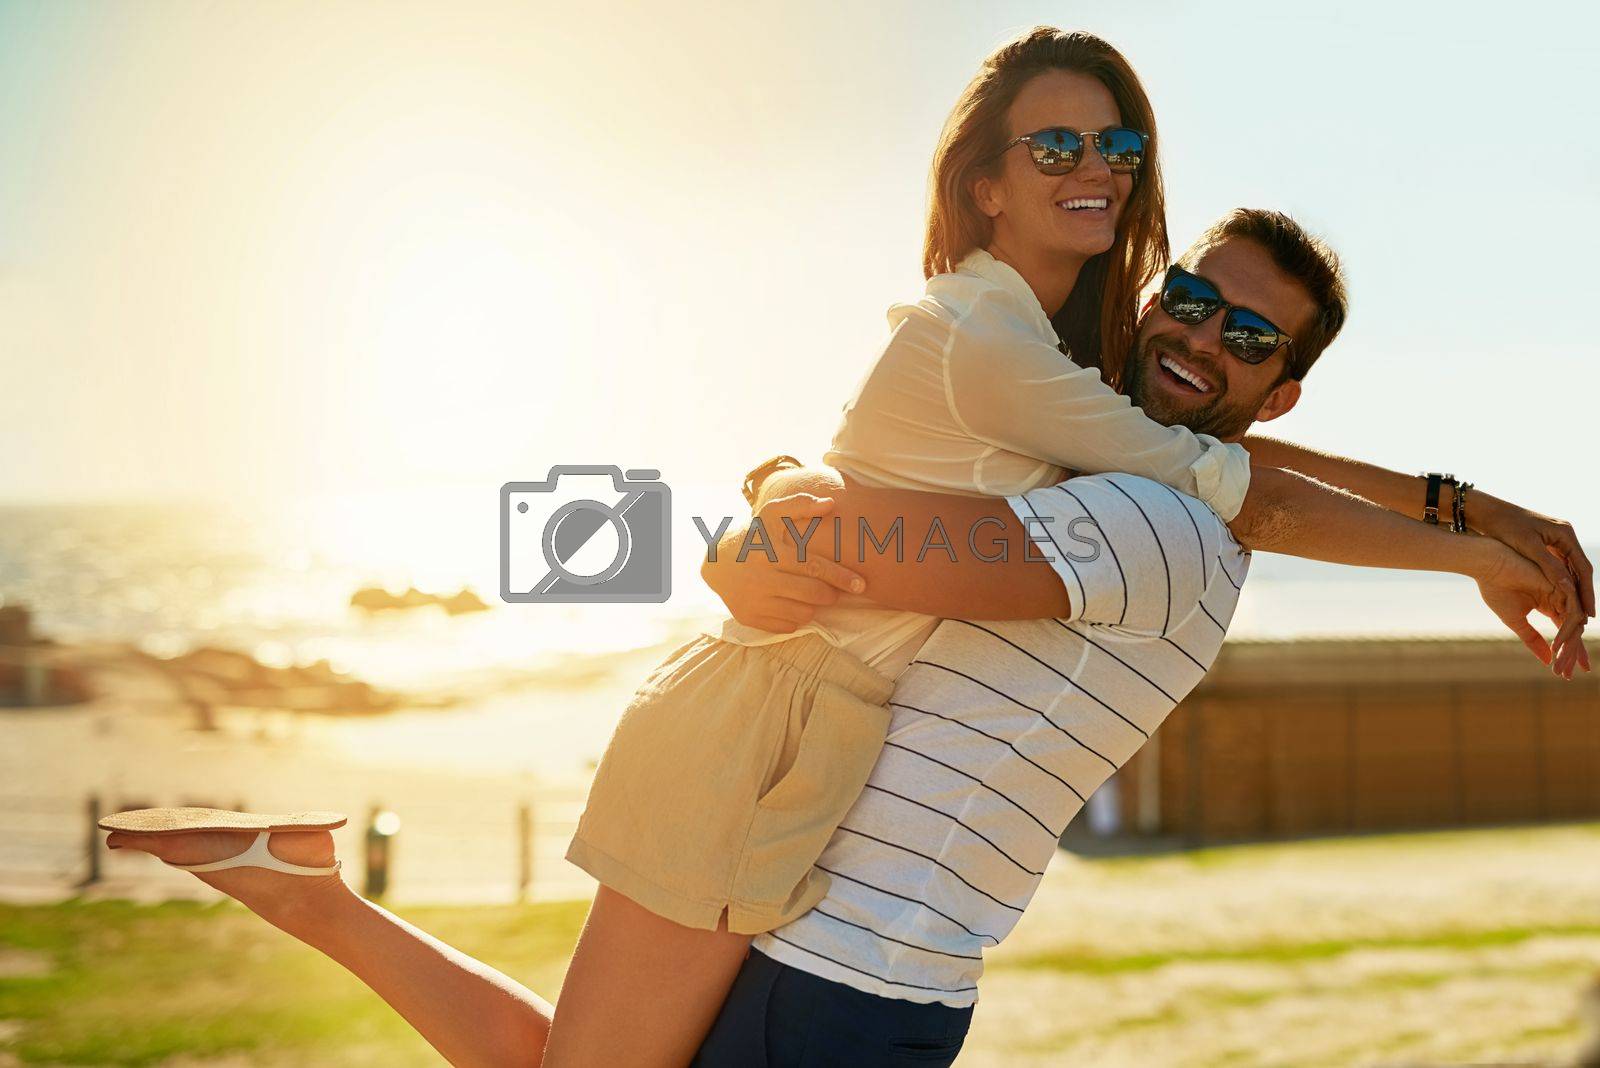 Royalty free image of Romance comes alive in summer. a happy young couple embracing on a summers day outdoors. by YuriArcurs